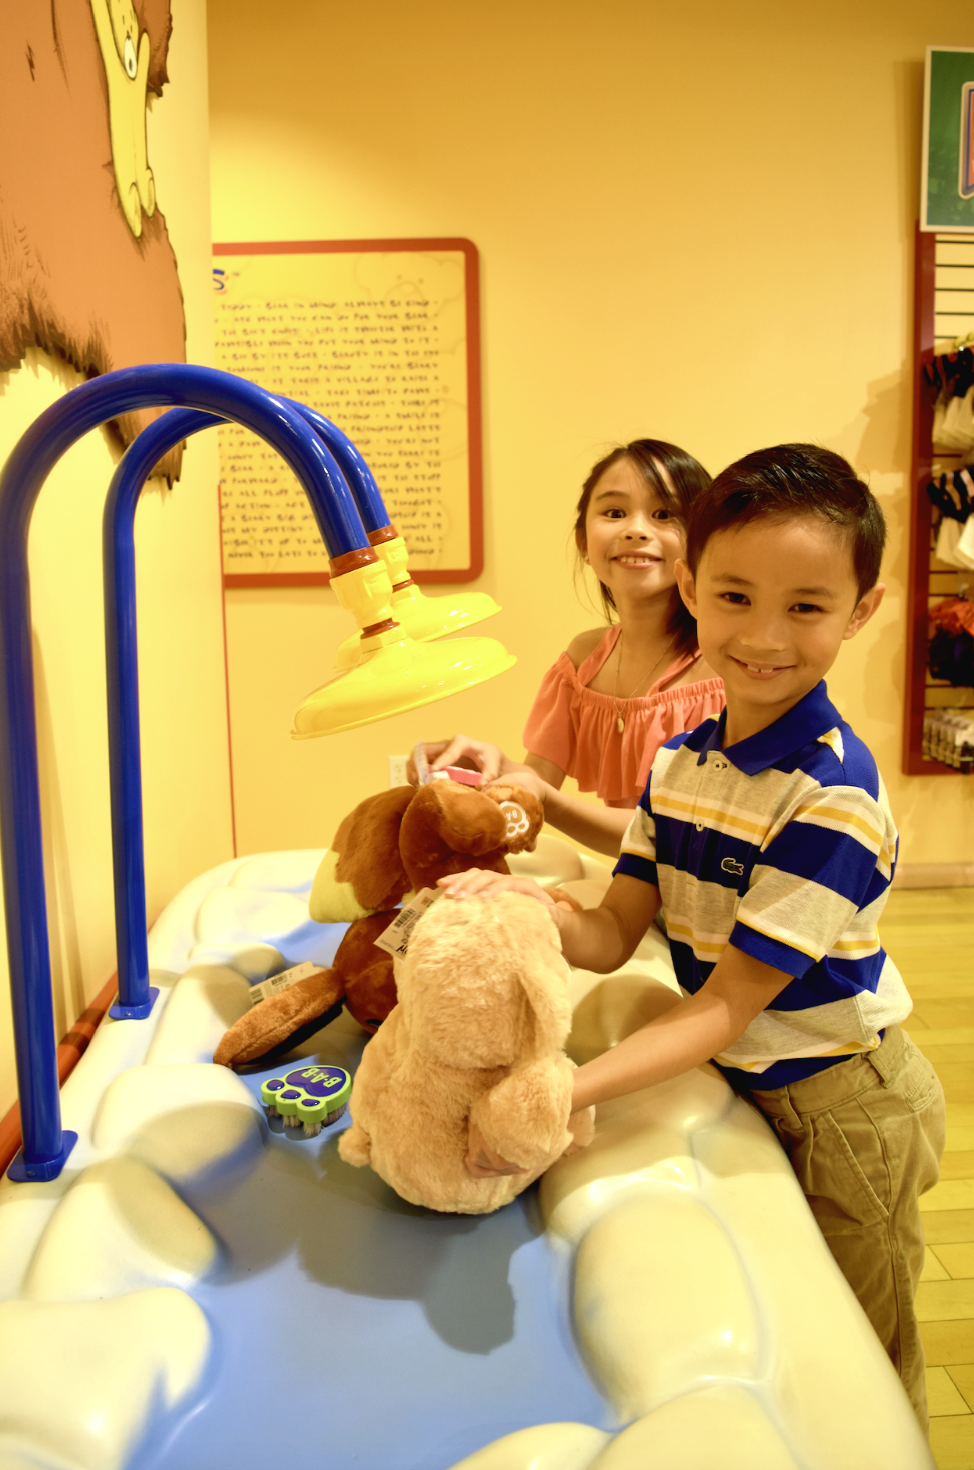 Celebrate National Teddy Bear Day with Build-A-Bear Workshop!